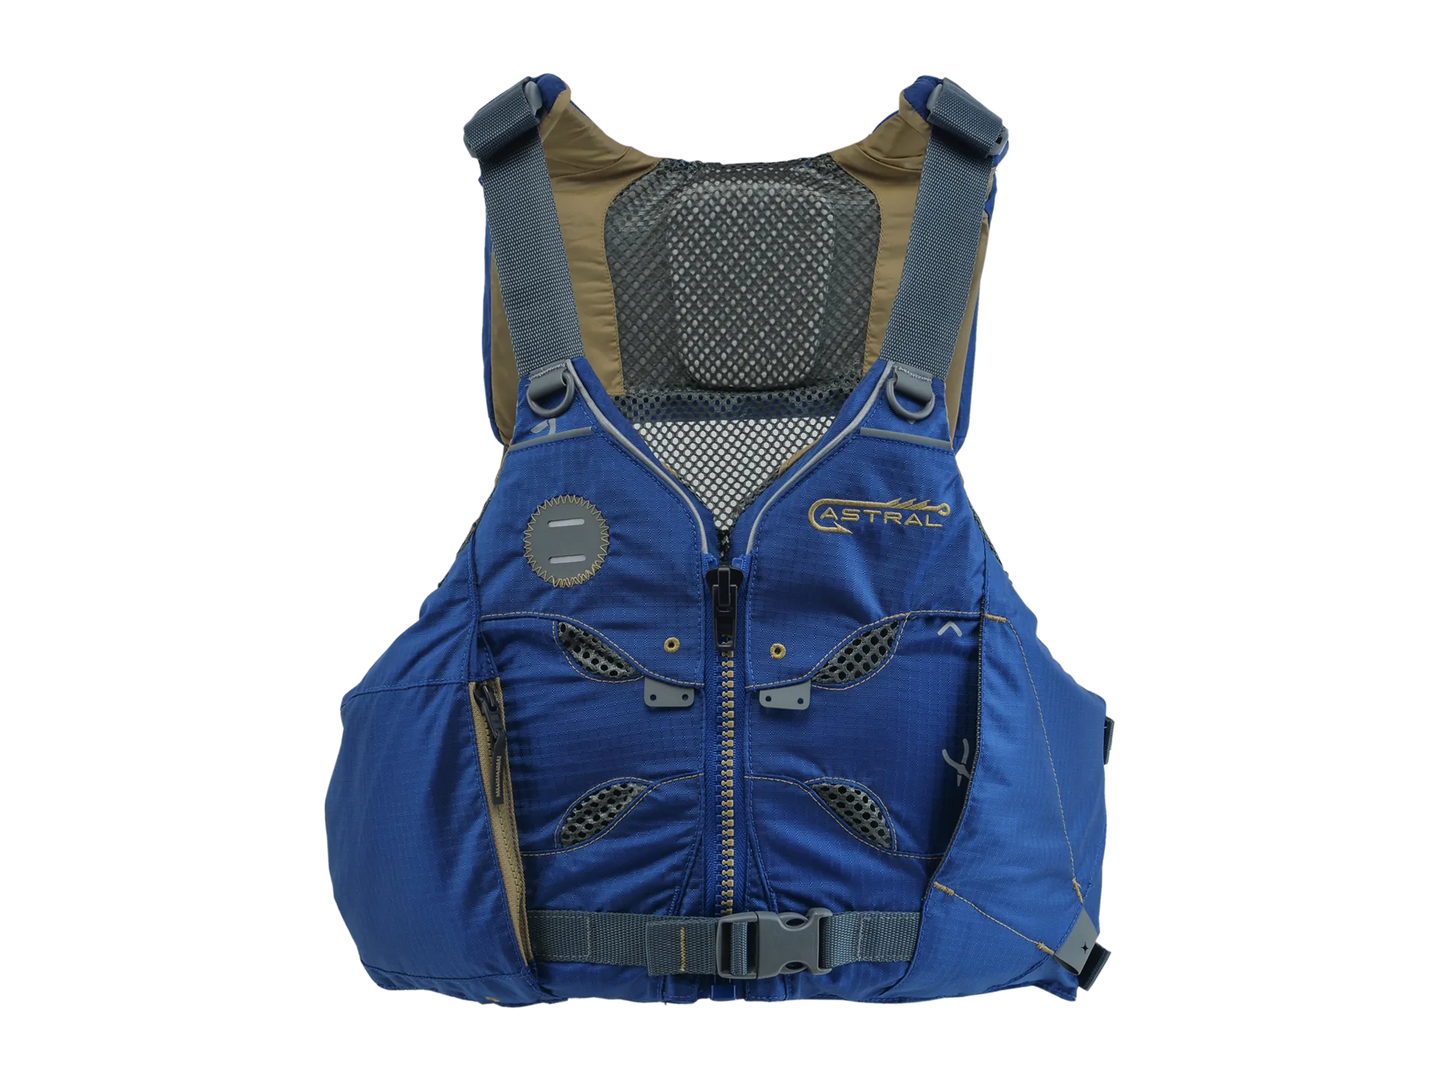 Featuring the V-Eight Fisher PFD fishing pfd, men's pfd, women's pfd manufactured by Astral shown here from a fourth angle.